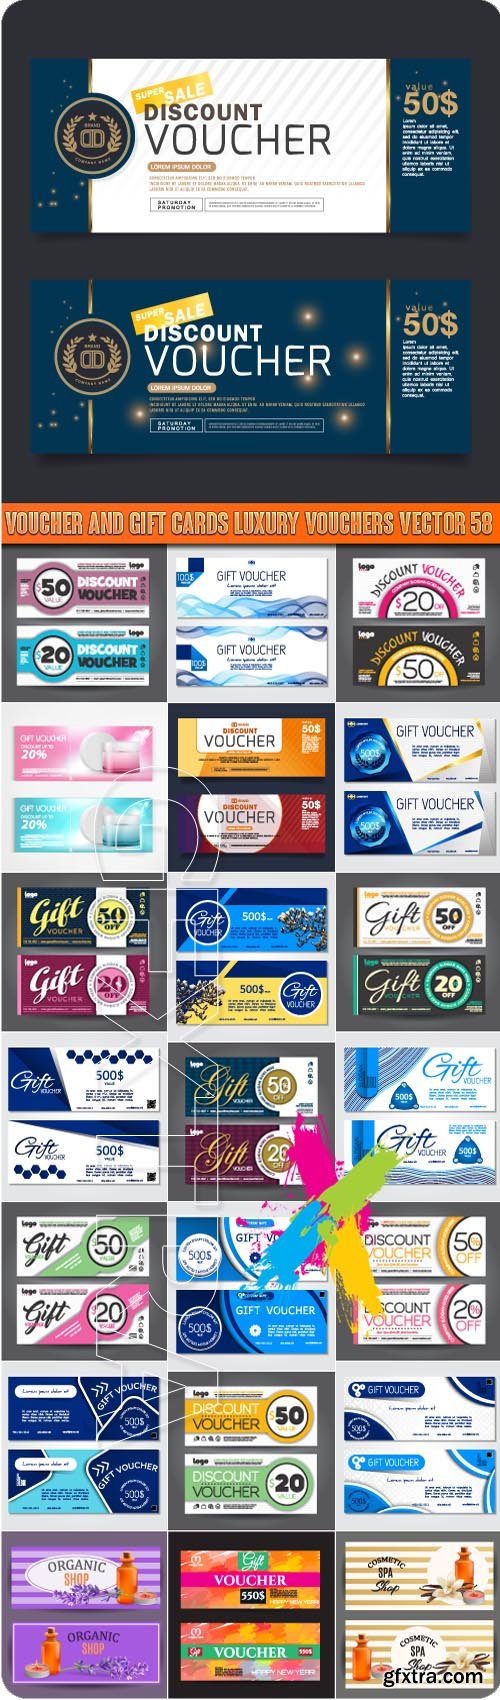 Voucher and gift cards luxury vouchers vector 58